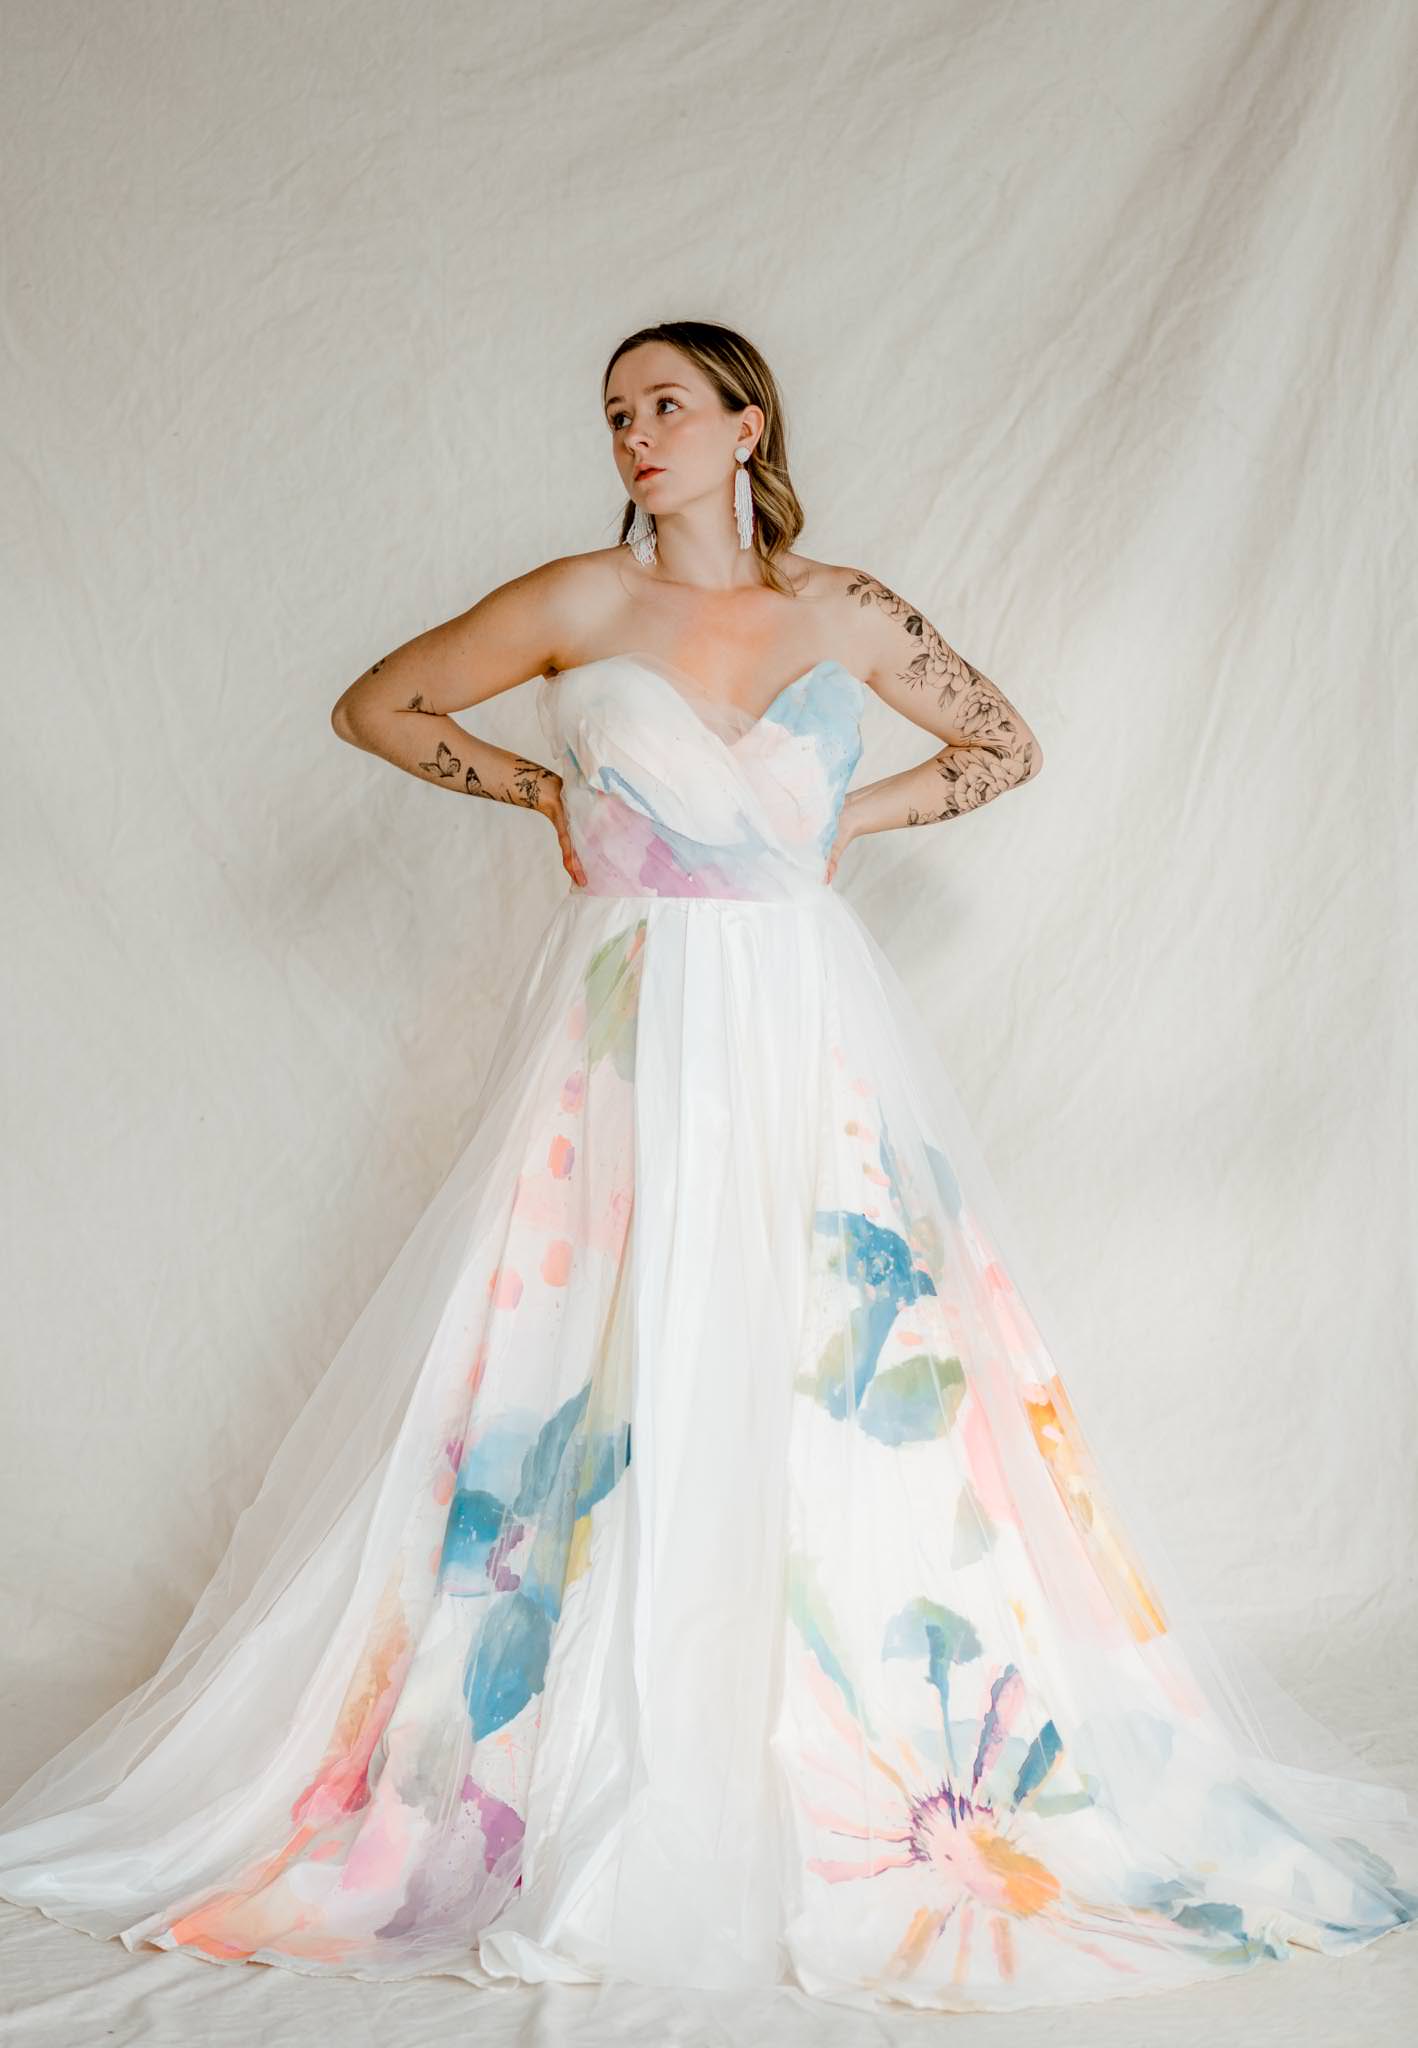 Hand painted floral taffeta wedding gown for photographers styled shoot Dress Rental company Rented by Claire LaFaye_In Bloom